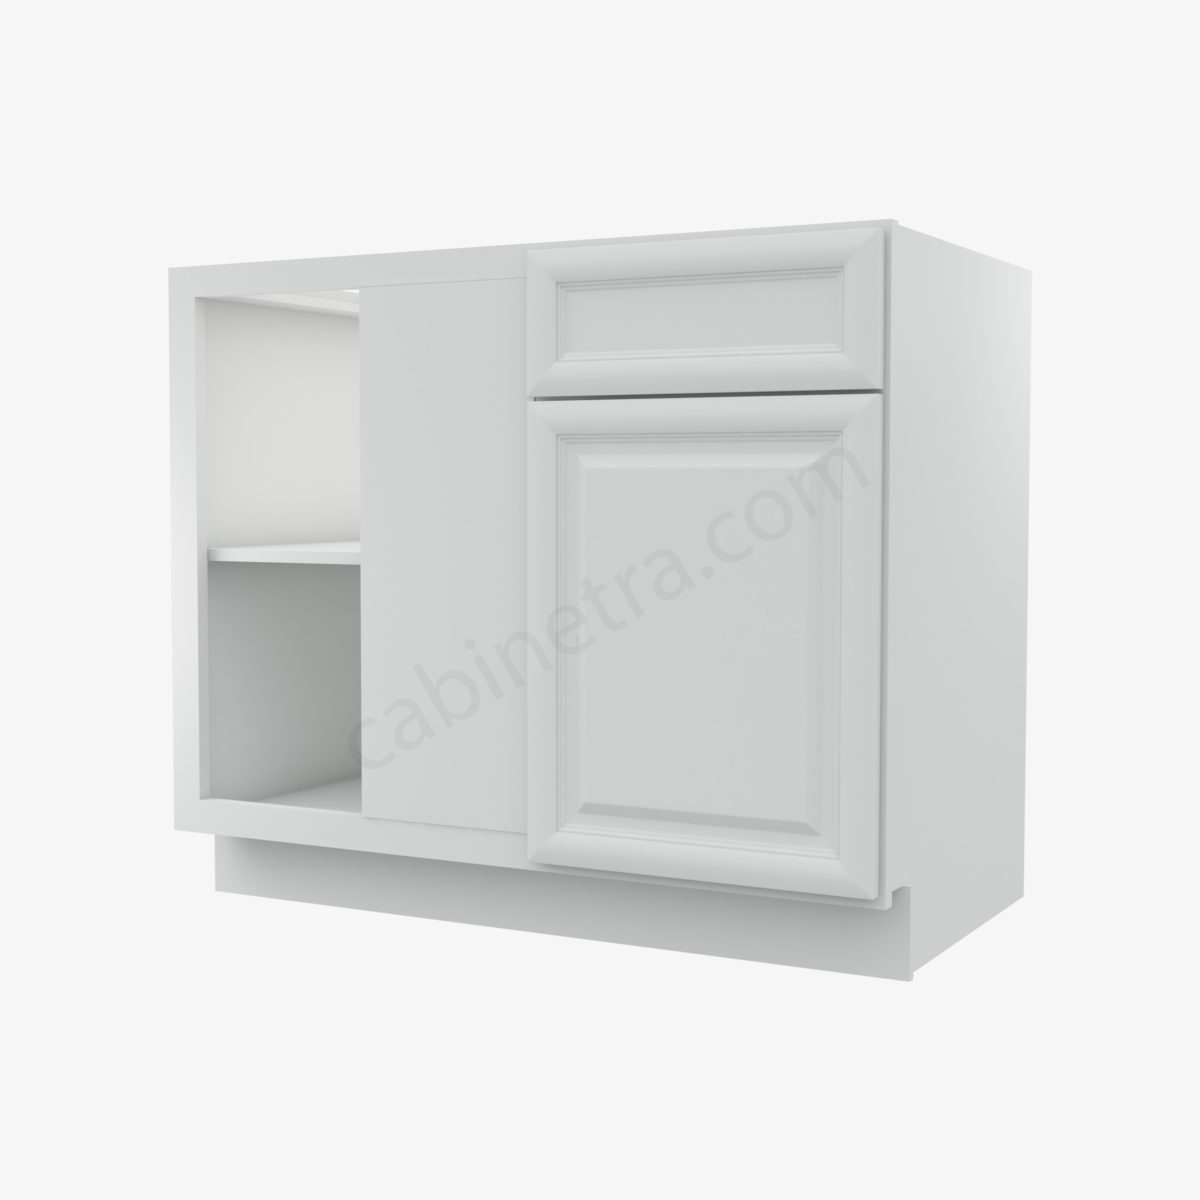 KW BBLC42 45 39W 0  Forevermark K White Cabinetra scaled